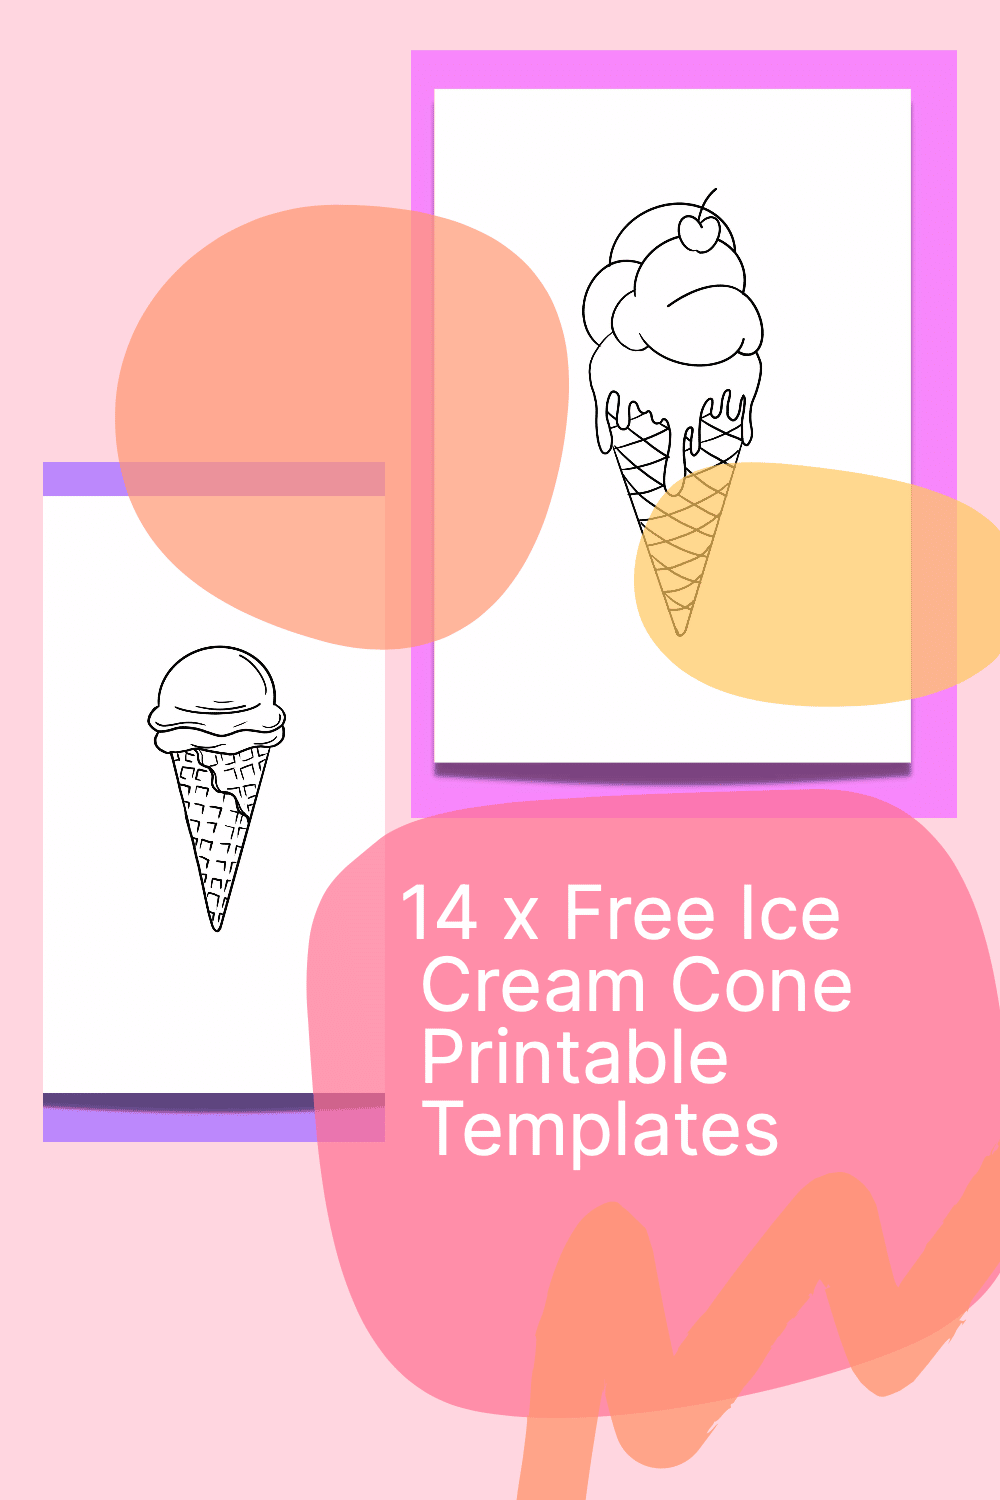 Get Creative with These 14 Free Ice Cream Cone Template Printables